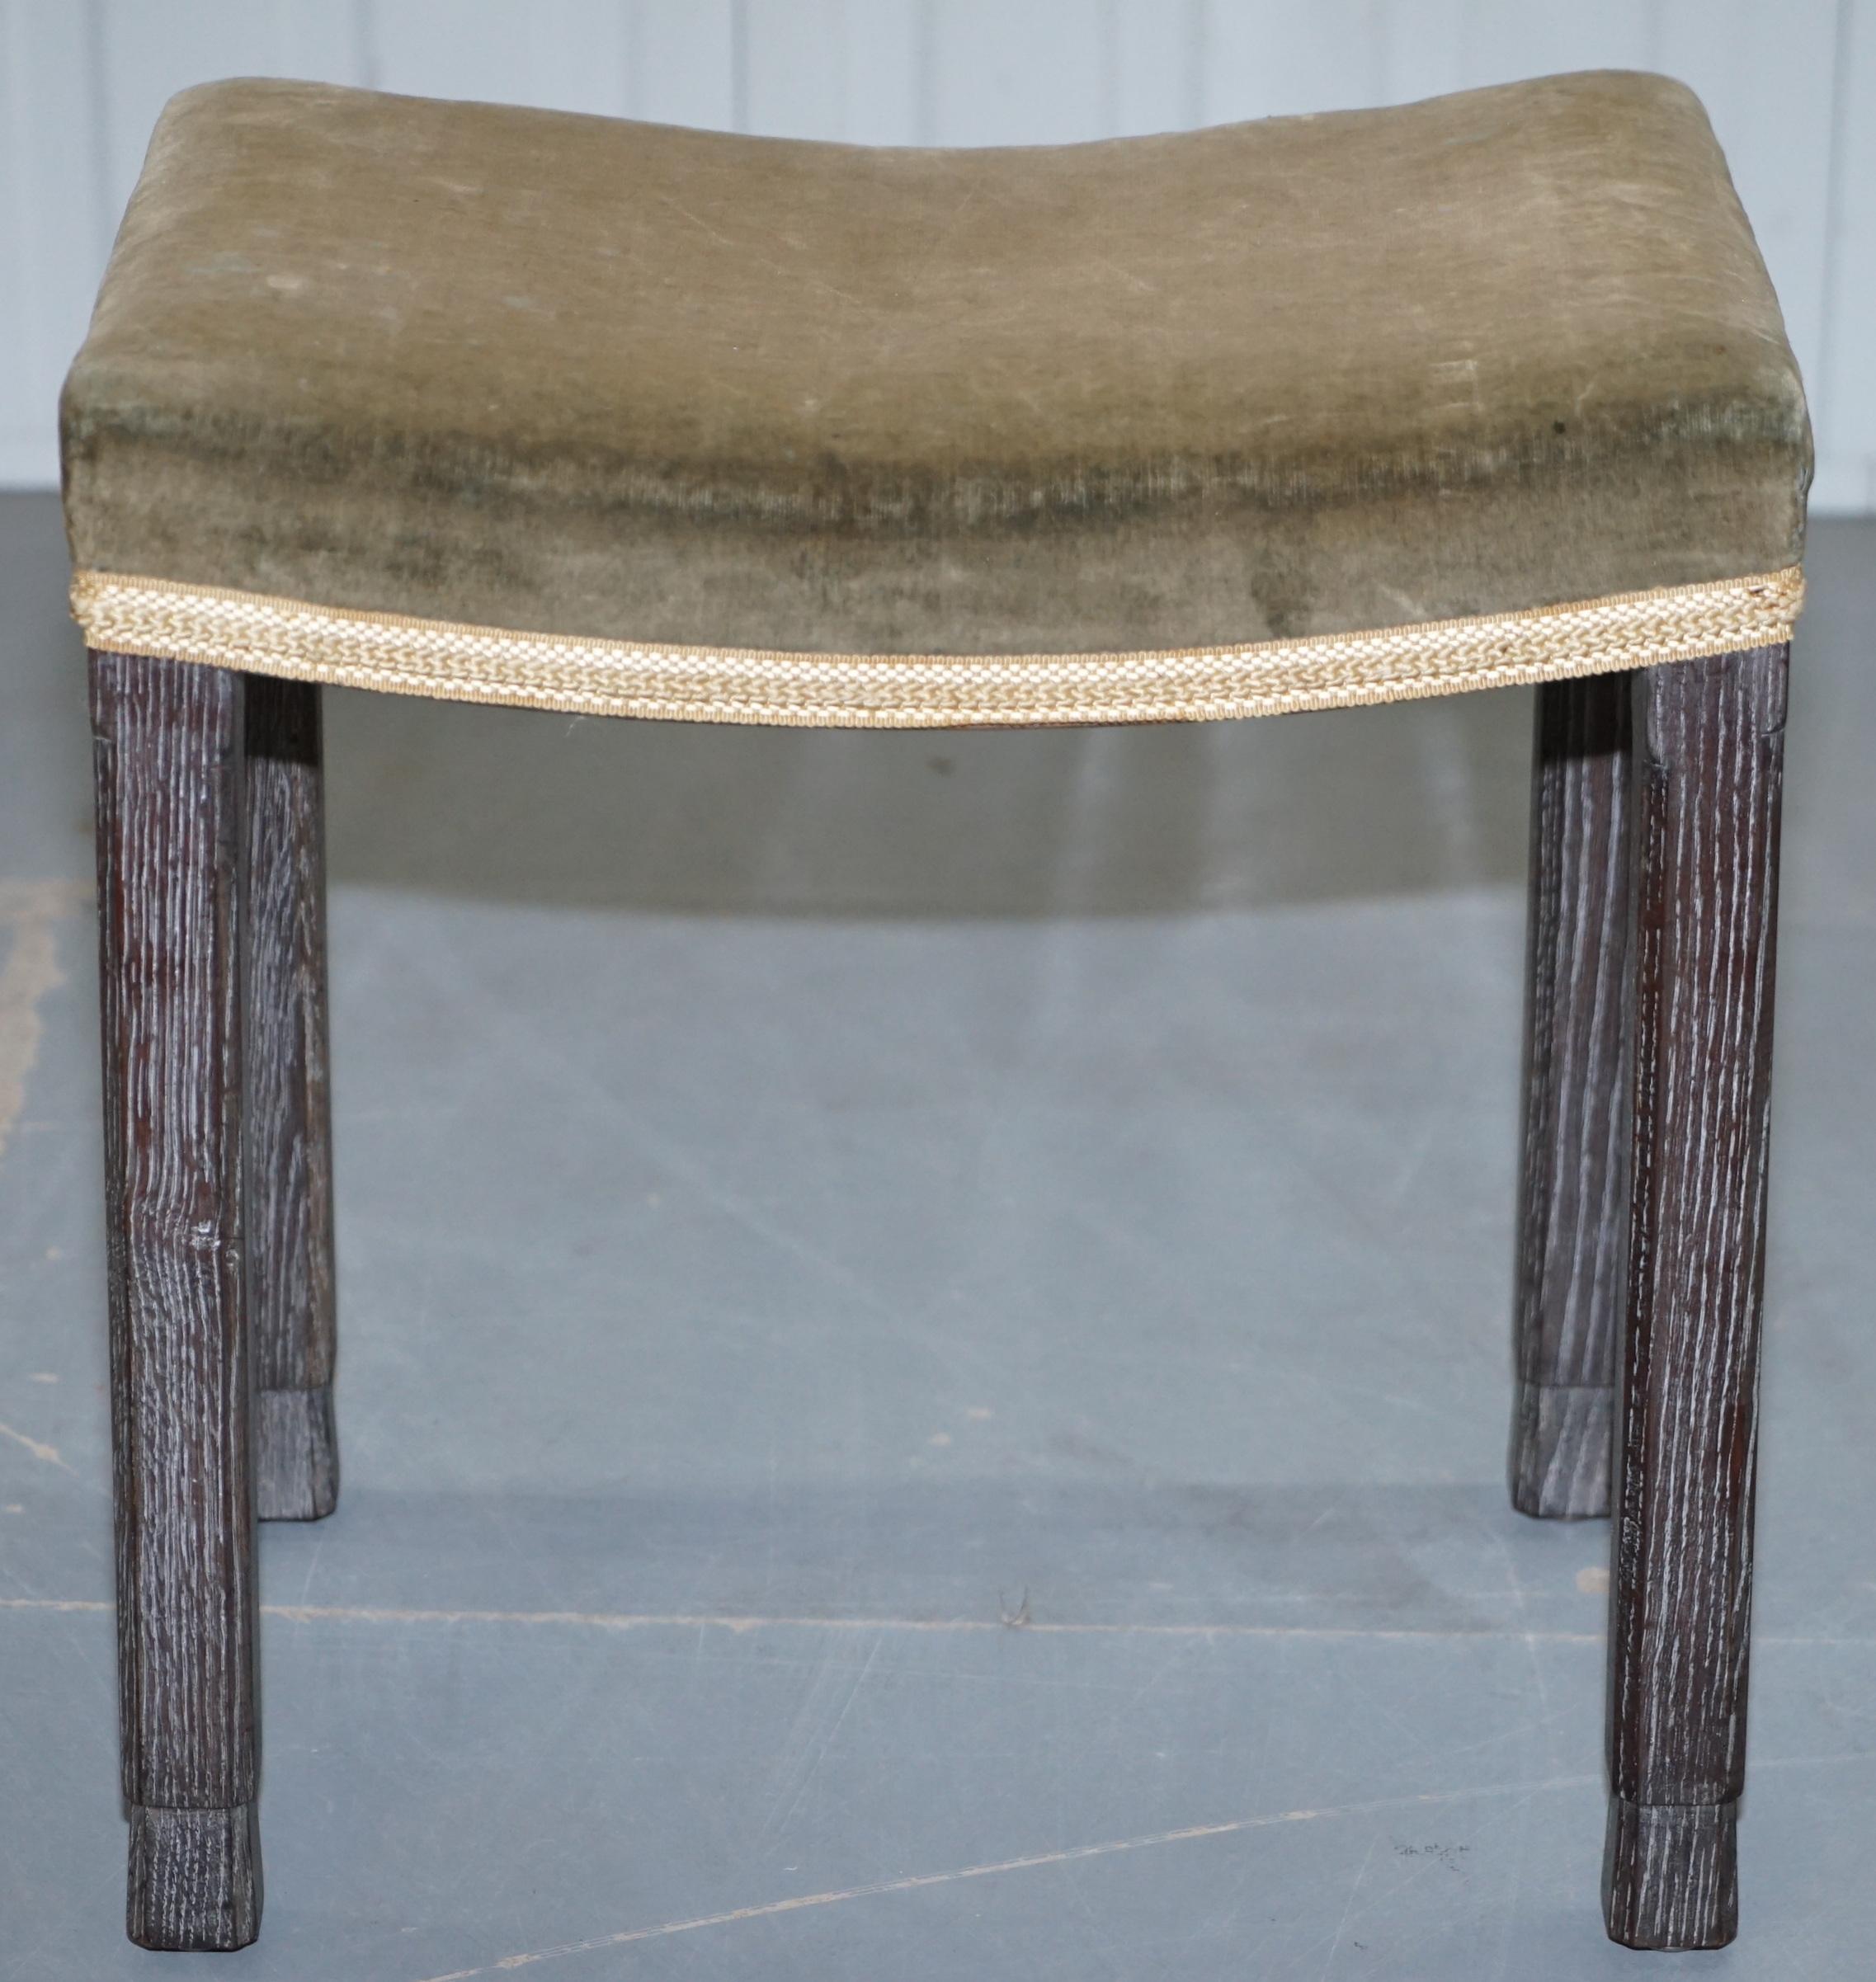 Upholstery Very Rare Original King George VI Coronation Stool 1937 Limed Oak by Maple & Co